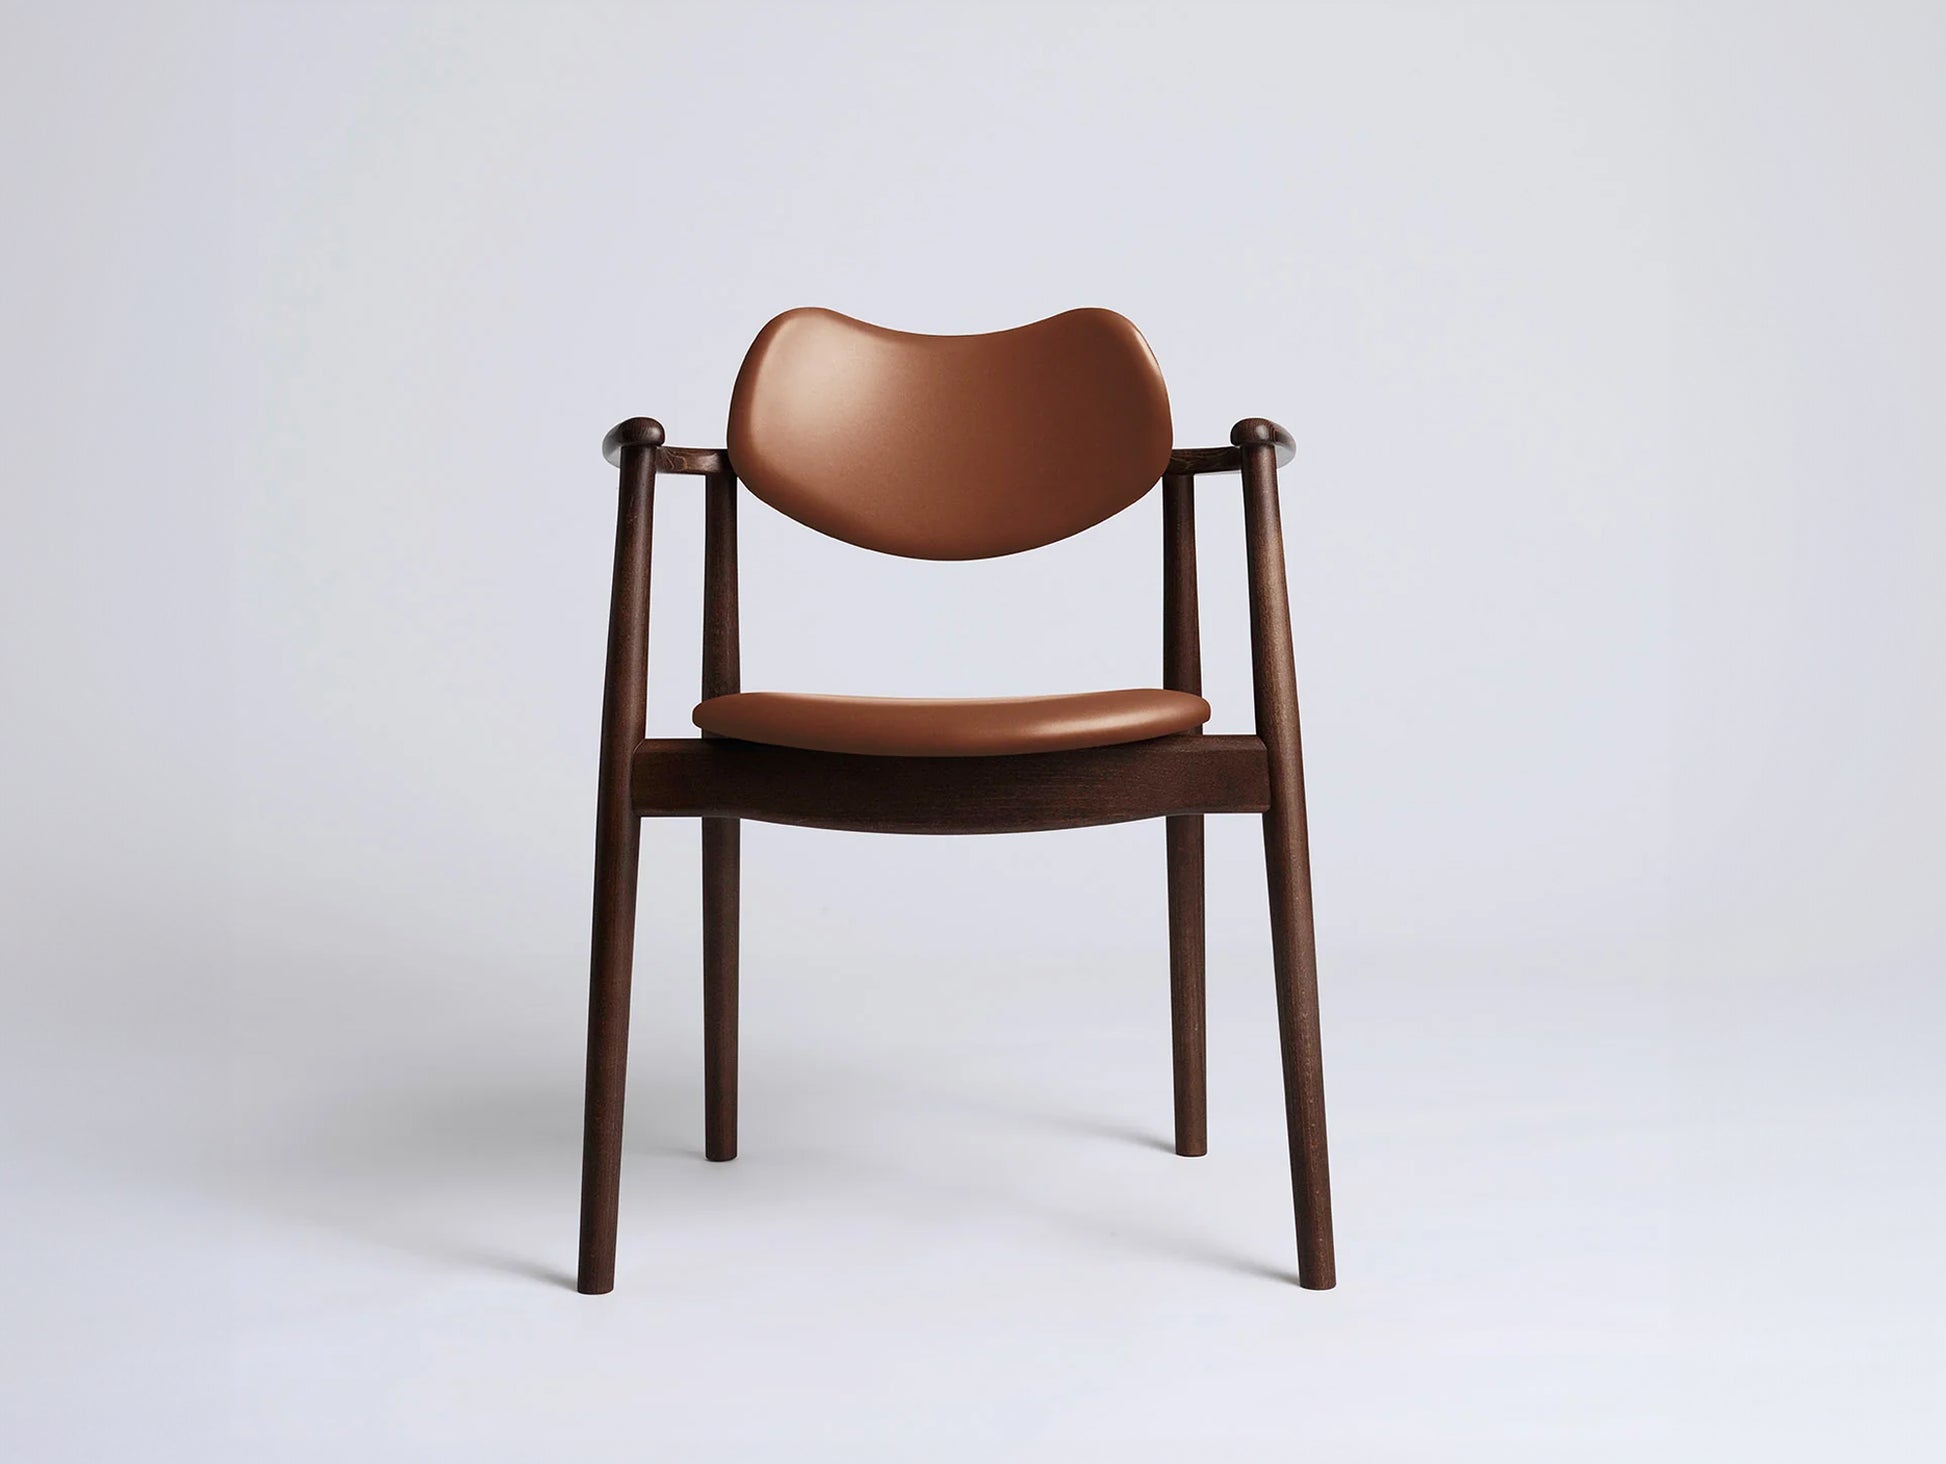 Regatta Chair Seat and Back Upholstered by Ro Collection - Walnut Stained Beech / Supreme Vacona Cognac Leather